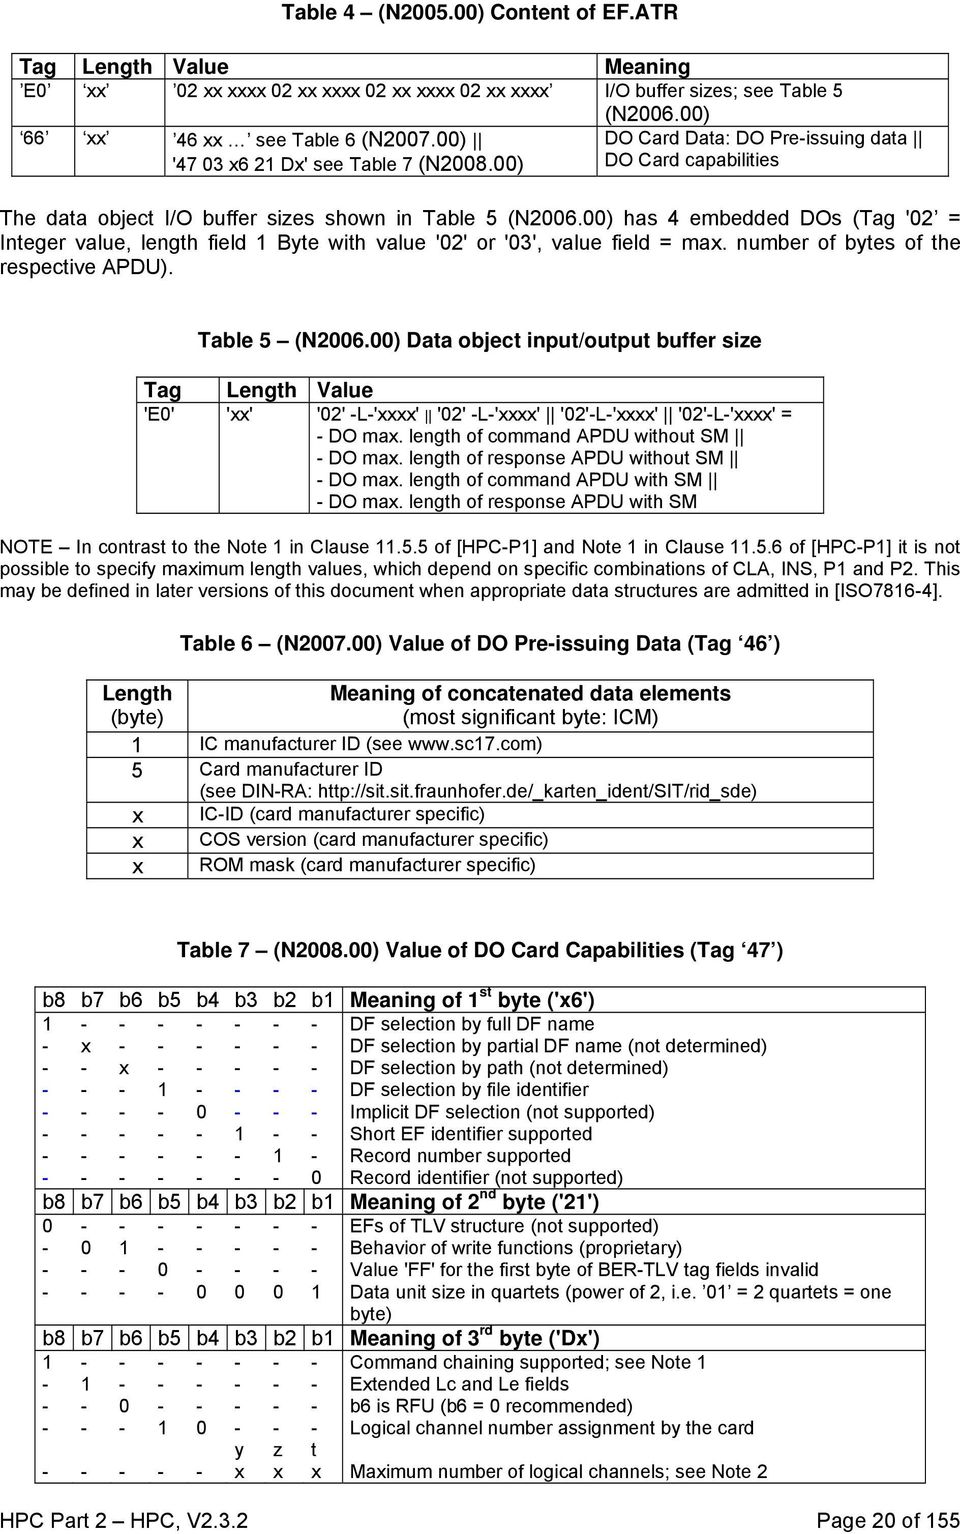 00) has 4 embedded DOs (Tag '02 = Integer value, length field 1 Byte with value '02' or '03', value field = max. number of bytes of the respective APDU). Table 5 (N2006.